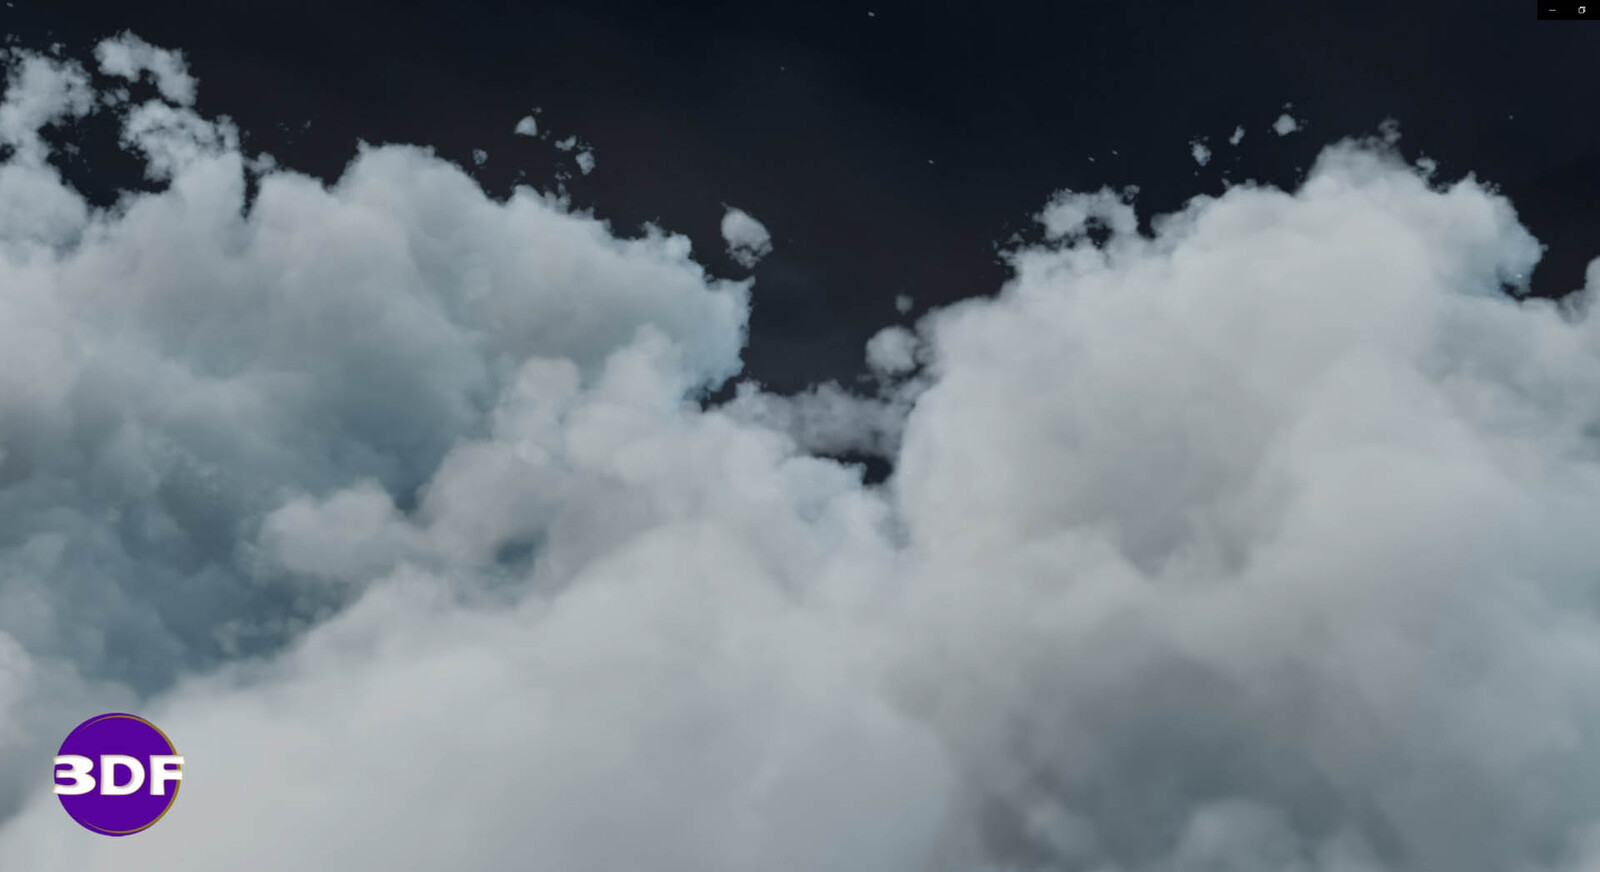 Short Flying through Large Clouds